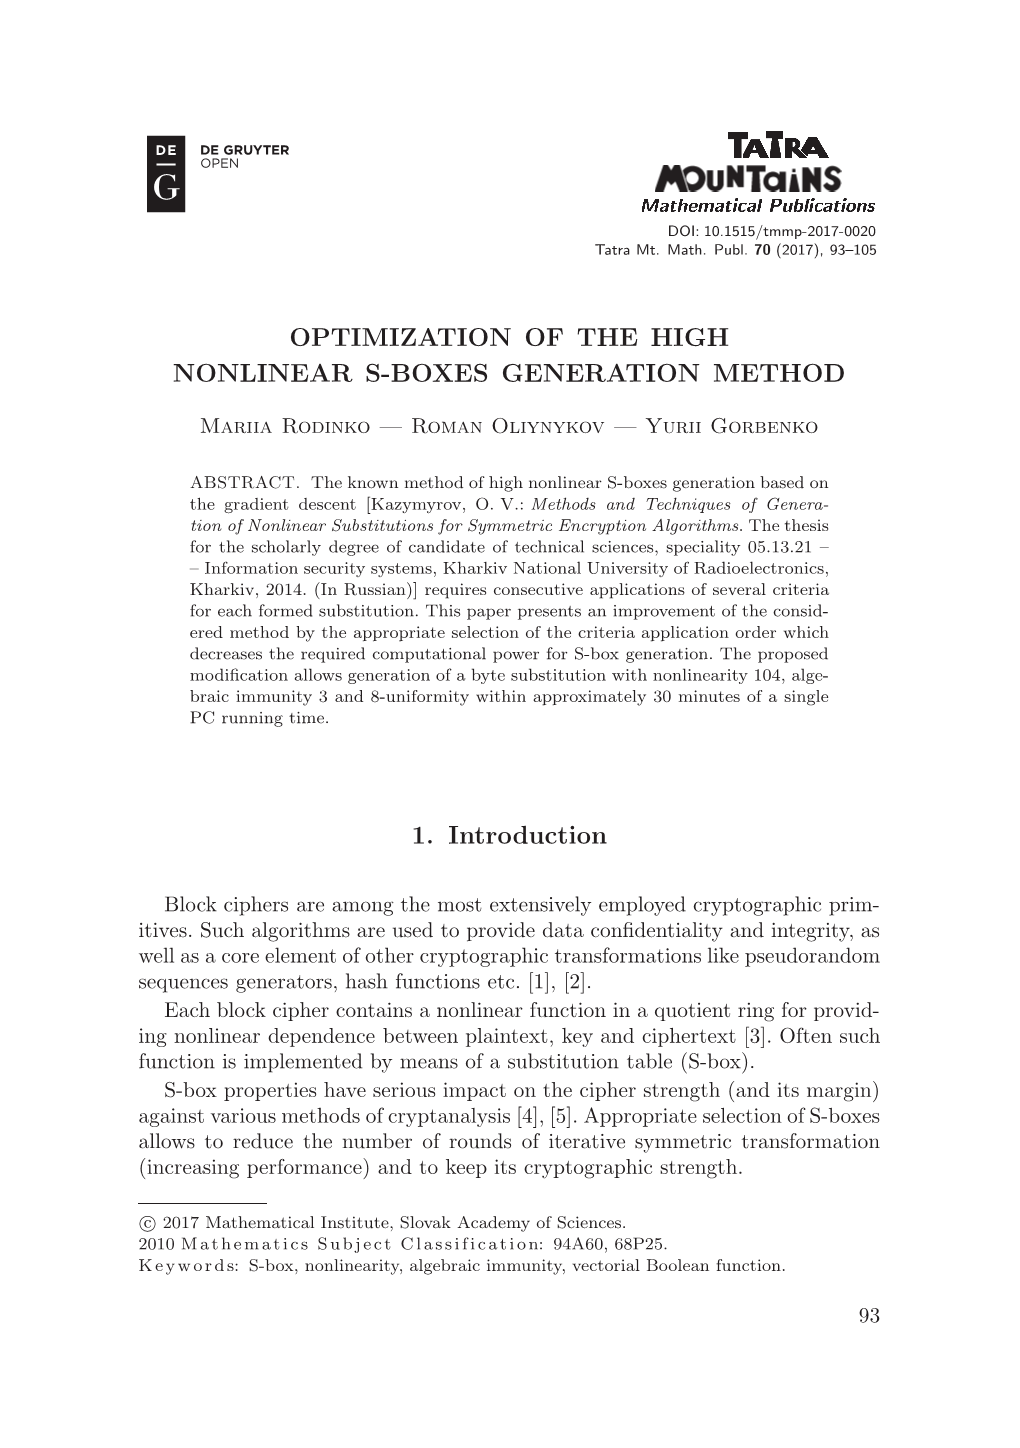 Optimization of the High Nonlinear S-Boxes Generation Method